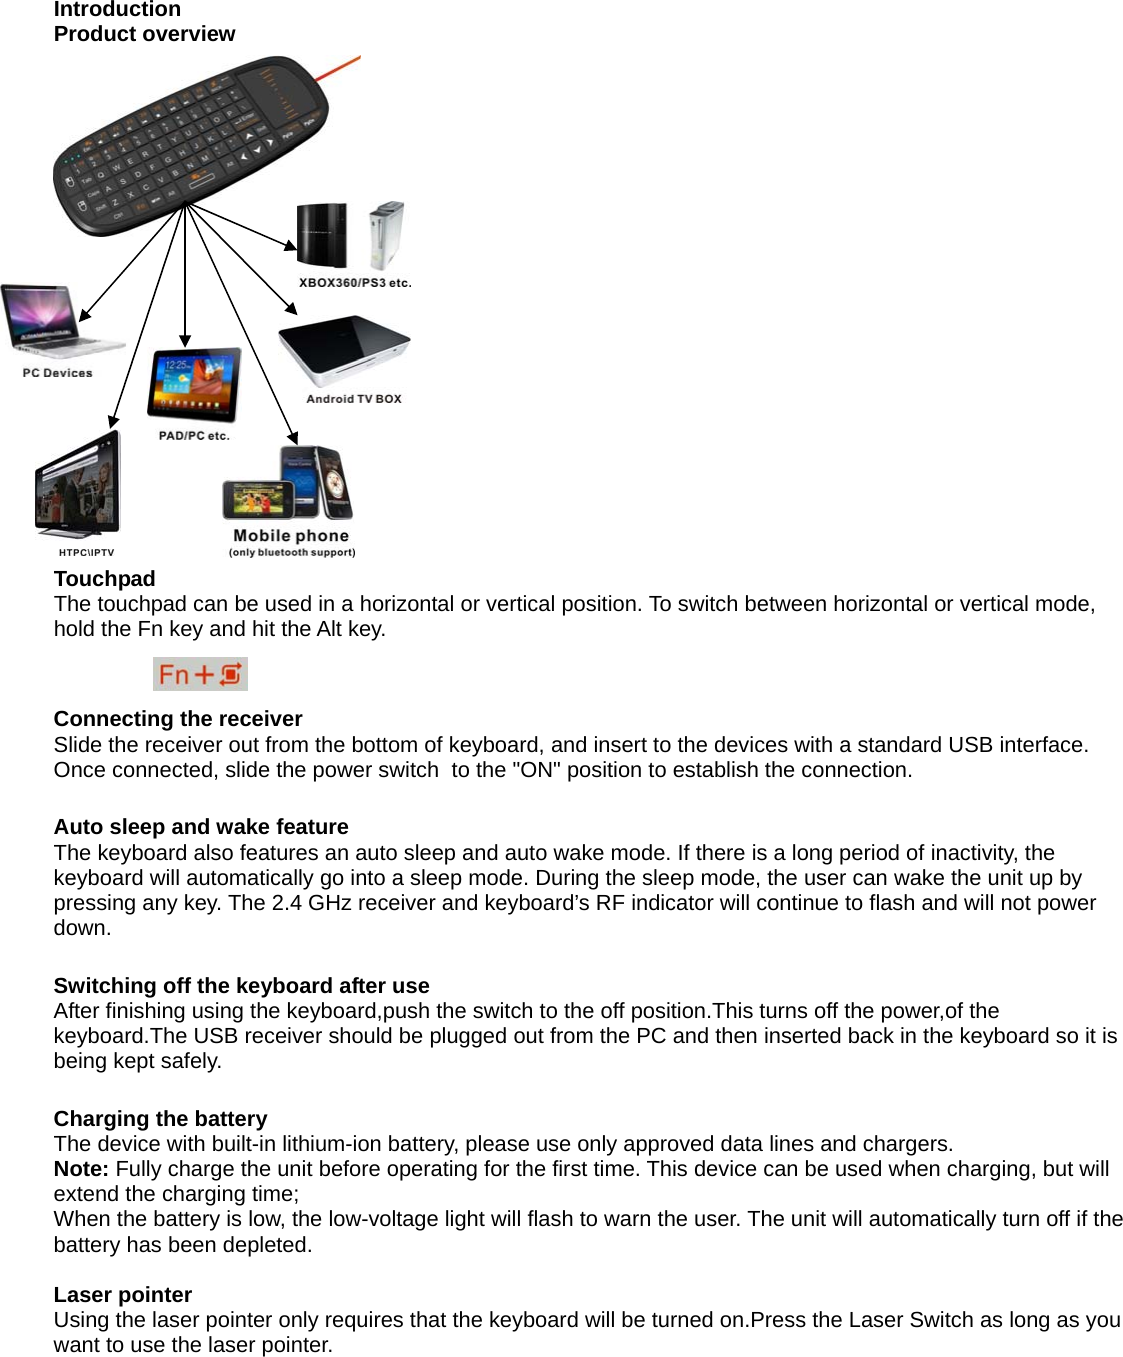  Introduction Product overview                 Touchpad The touchpad can be used in a horizontal or vertical position. To switch between horizontal or vertical mode, hold the Fn key and hit the Alt key.                    Connecting the receiver Slide the receiver out from the bottom of keyboard, and insert to the devices with a standard USB interface. Once connected, slide the power switch  to the &quot;ON&quot; position to establish the connection.  Auto sleep and wake feature The keyboard also features an auto sleep and auto wake mode. If there is a long period of inactivity, the keyboard will automatically go into a sleep mode. During the sleep mode, the user can wake the unit up by pressing any key. The 2.4 GHz receiver and keyboard’s RF indicator will continue to flash and will not power down.  Switching off the keyboard after use After finishing using the keyboard,push the switch to the off position.This turns off the power,of the keyboard.The USB receiver should be plugged out from the PC and then inserted back in the keyboard so it is being kept safely.  Charging the battery The device with built-in lithium-ion battery, please use only approved data lines and chargers. Note: Fully charge the unit before operating for the first time. This device can be used when charging, but will extend the charging time; When the battery is low, the low-voltage light will flash to warn the user. The unit will automatically turn off if the battery has been depleted.  Laser pointer Using the laser pointer only requires that the keyboard will be turned on.Press the Laser Switch as long as you want to use the laser pointer.          